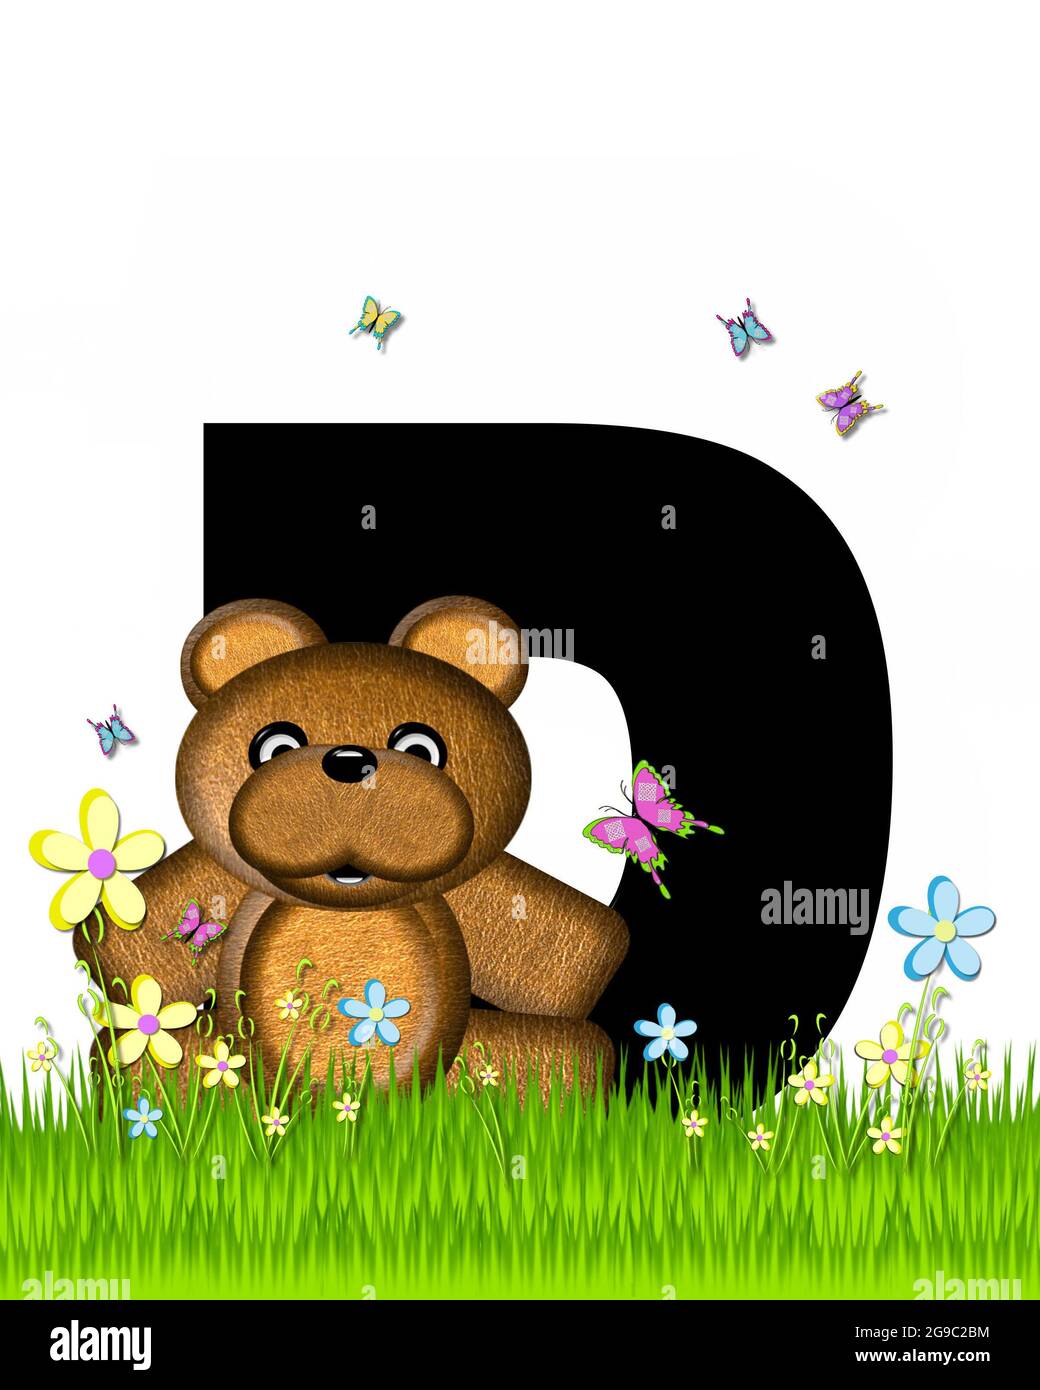 https://c8.alamy.com/comp/2G9C2BM/the-letter-d-in-the-alphabet-set-teddy-butterfly-field-is-black-teddy-bear-chases-colorful-butterflies-across-a-grassy-field-with-wildflowers-2G9C2BM.jpg